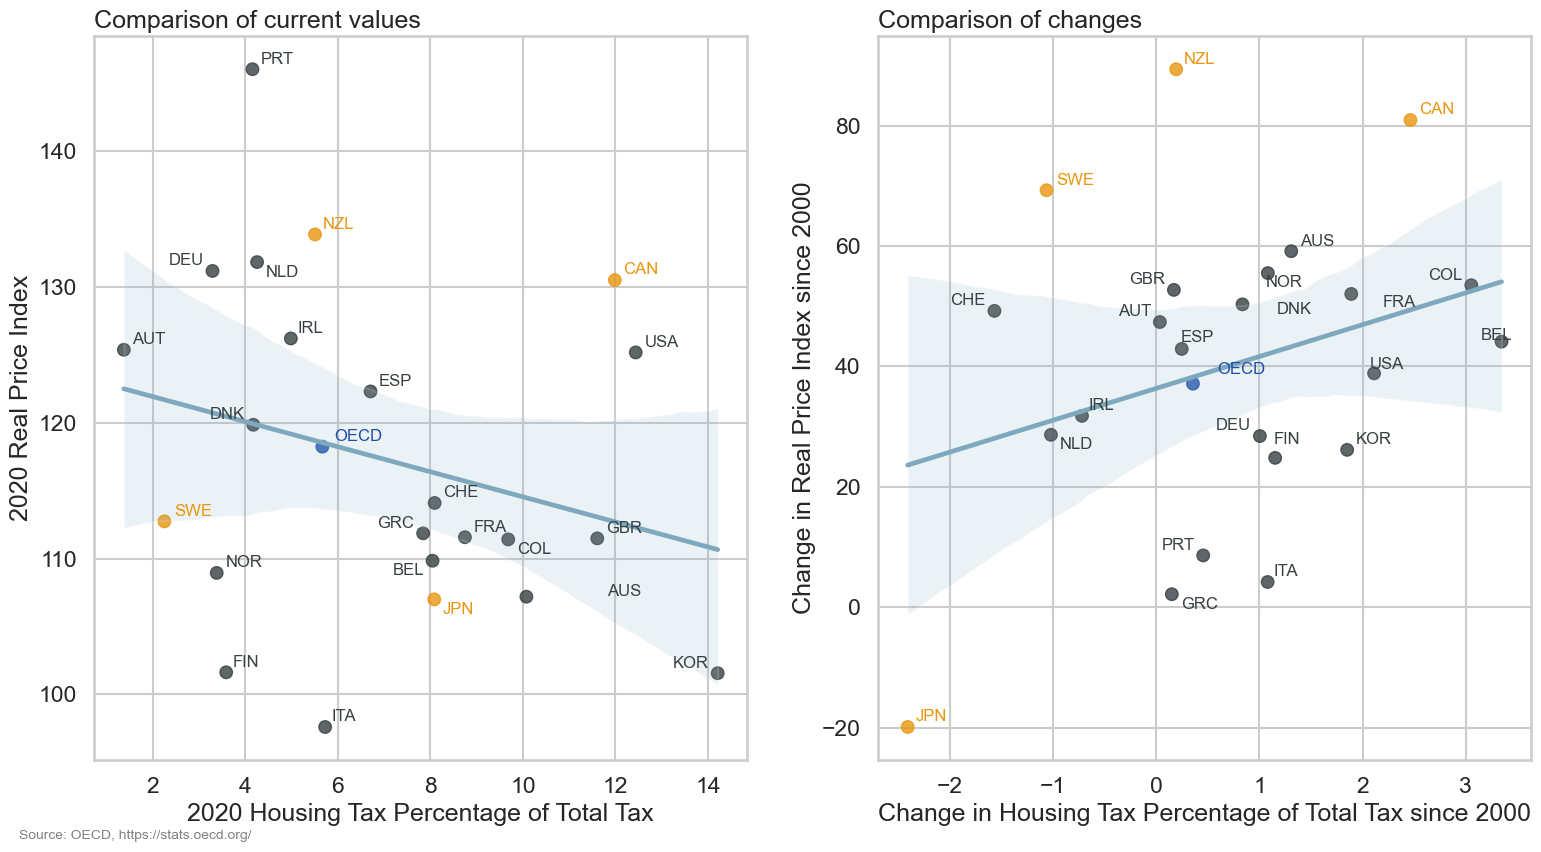 Scatter plot showing the relationship between housing tax as a percentage of total tax and Real Price Index in 2020 and the changes since 2000 for selected OECD countries